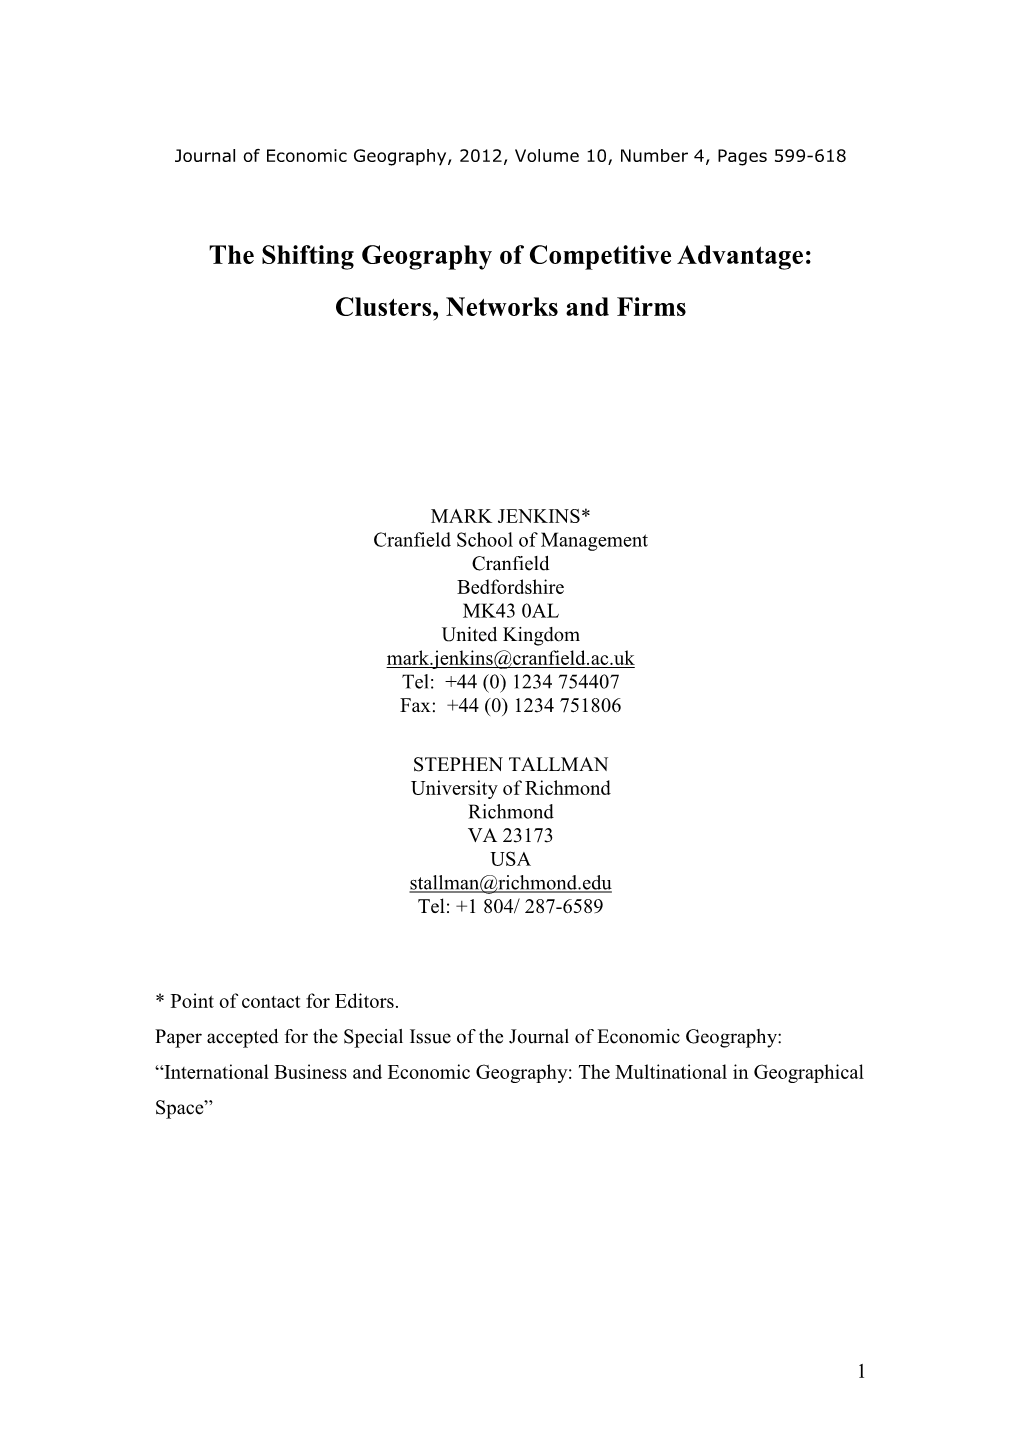 The Shifting Geography of Competitive Advantage: Clusters, Networks and Firms